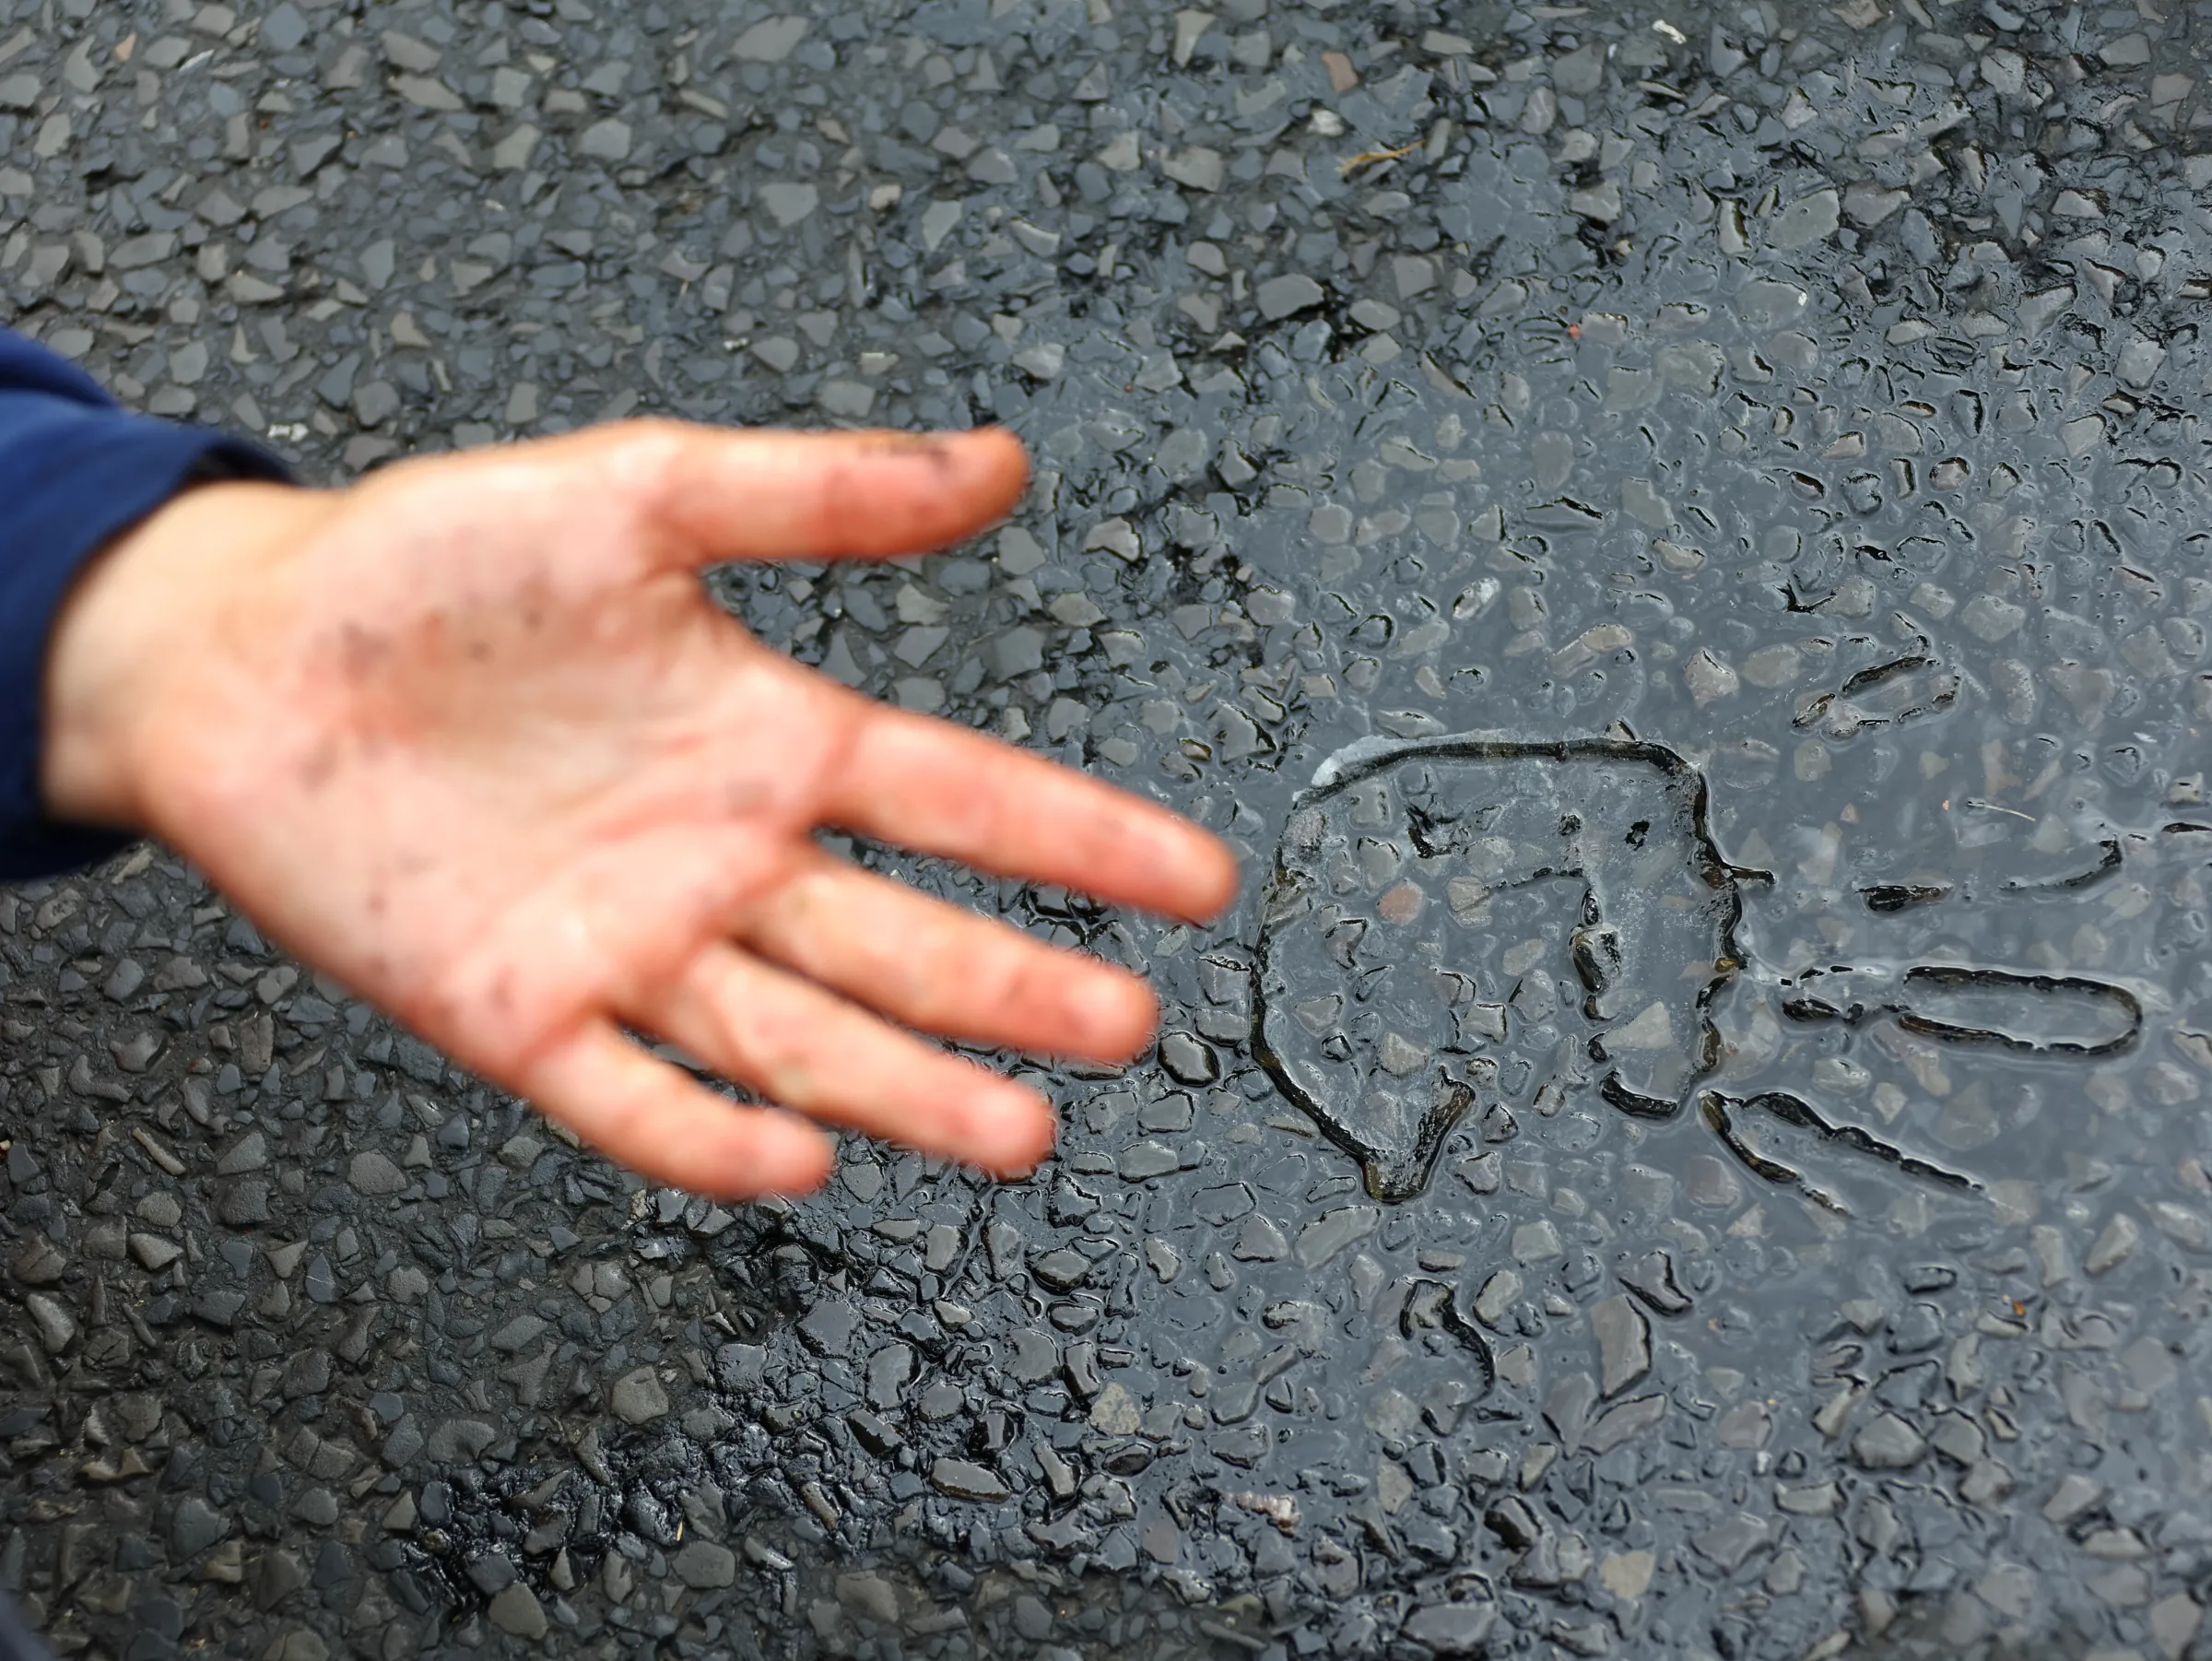 The shape of the hand is seen on the glue on the road as 'Letzte Generation' (Last Generation) activist block a road under the slogan 'Let's stop the fossil madness!' for an end to fossil fuels and against oil drilling in the North Sea, in Berlin, Germany,